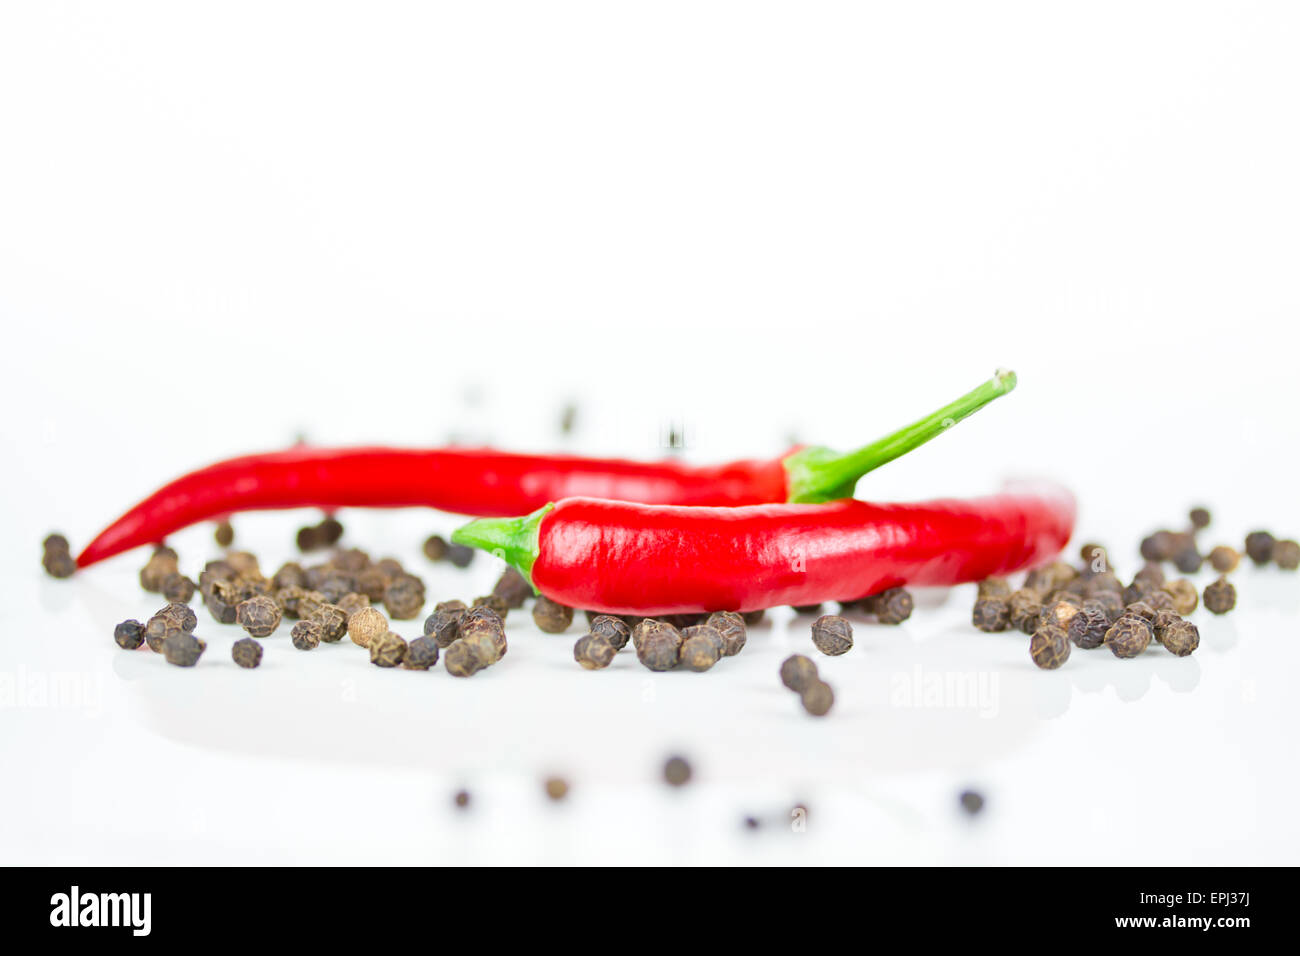 chili peppers Stock Photo